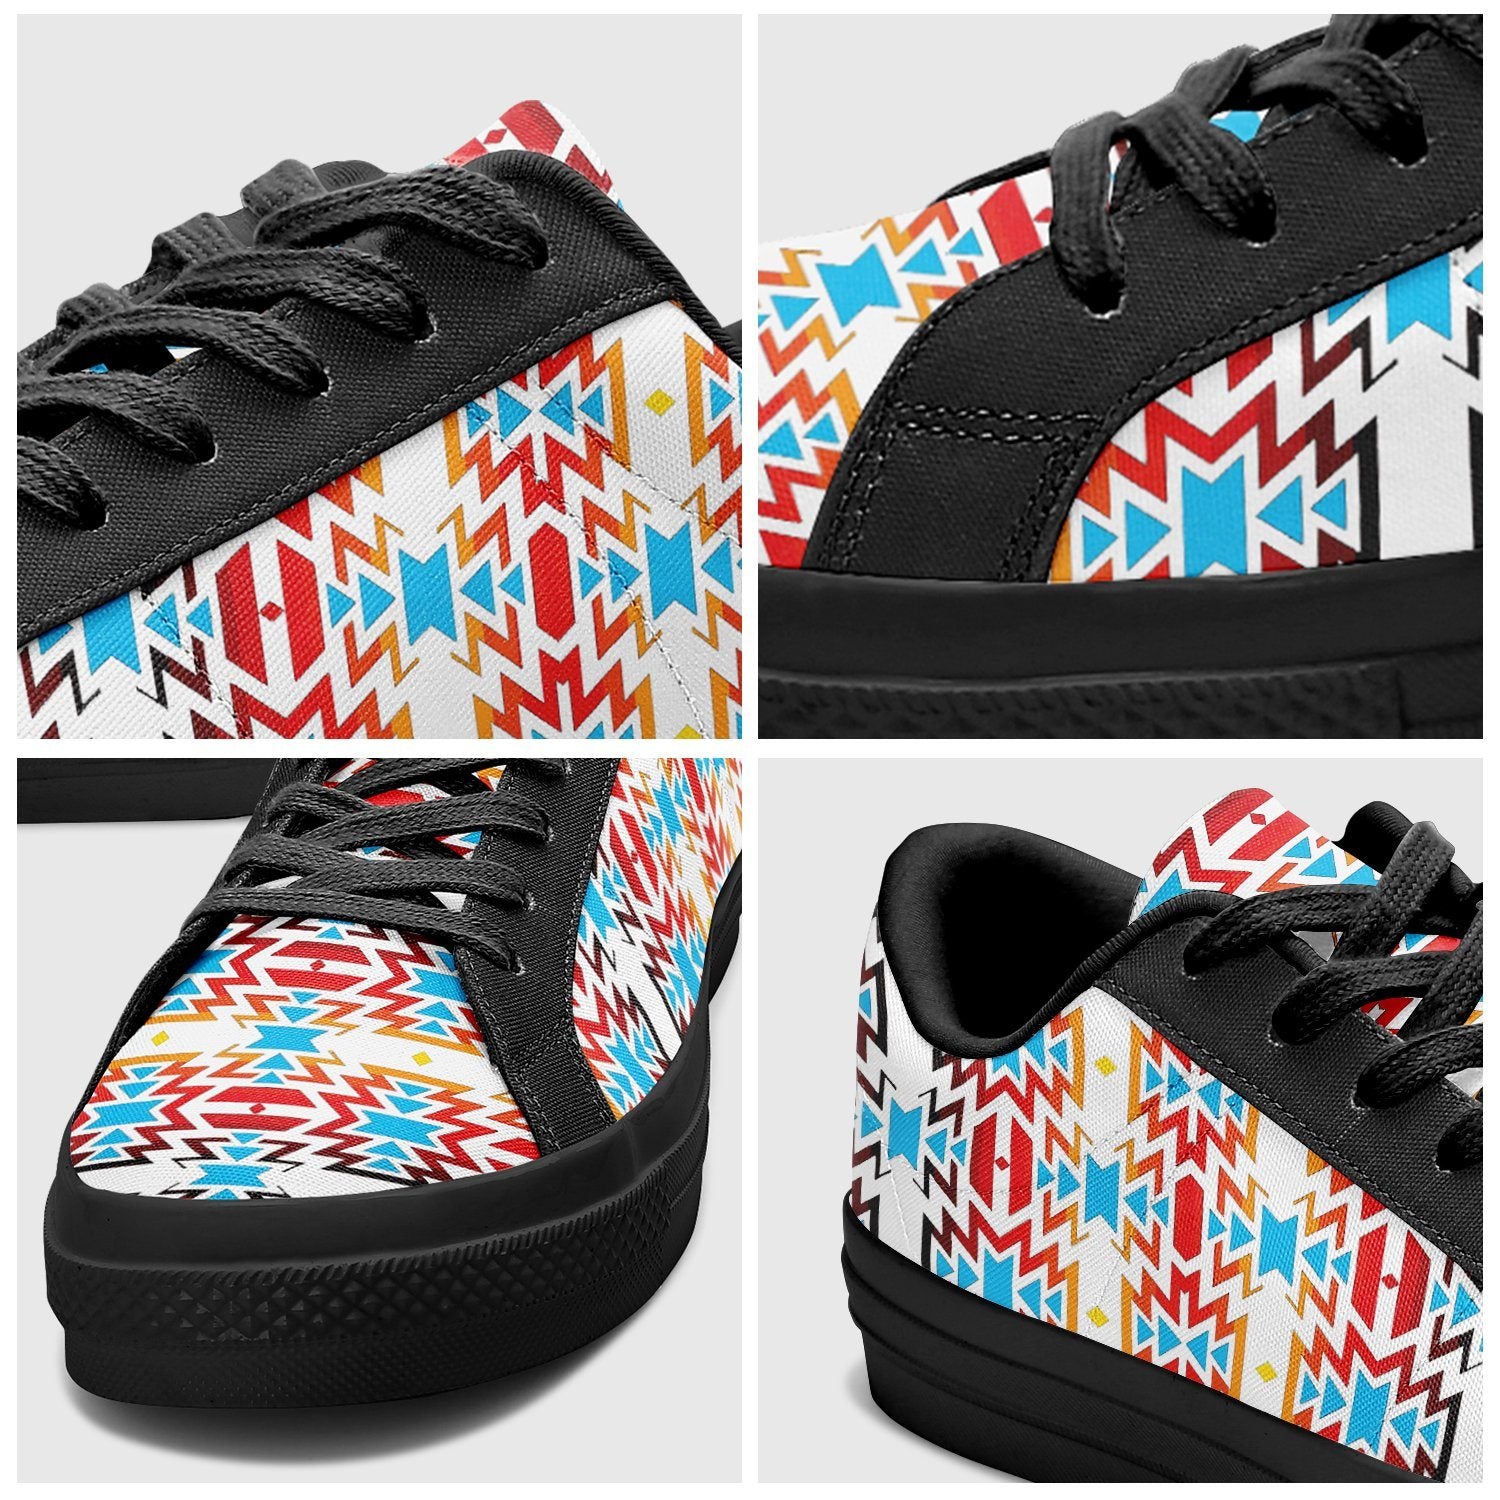 Fire Colors and Sky Aapisi Low Top Canvas Shoes Black Sole 49 Dzine 